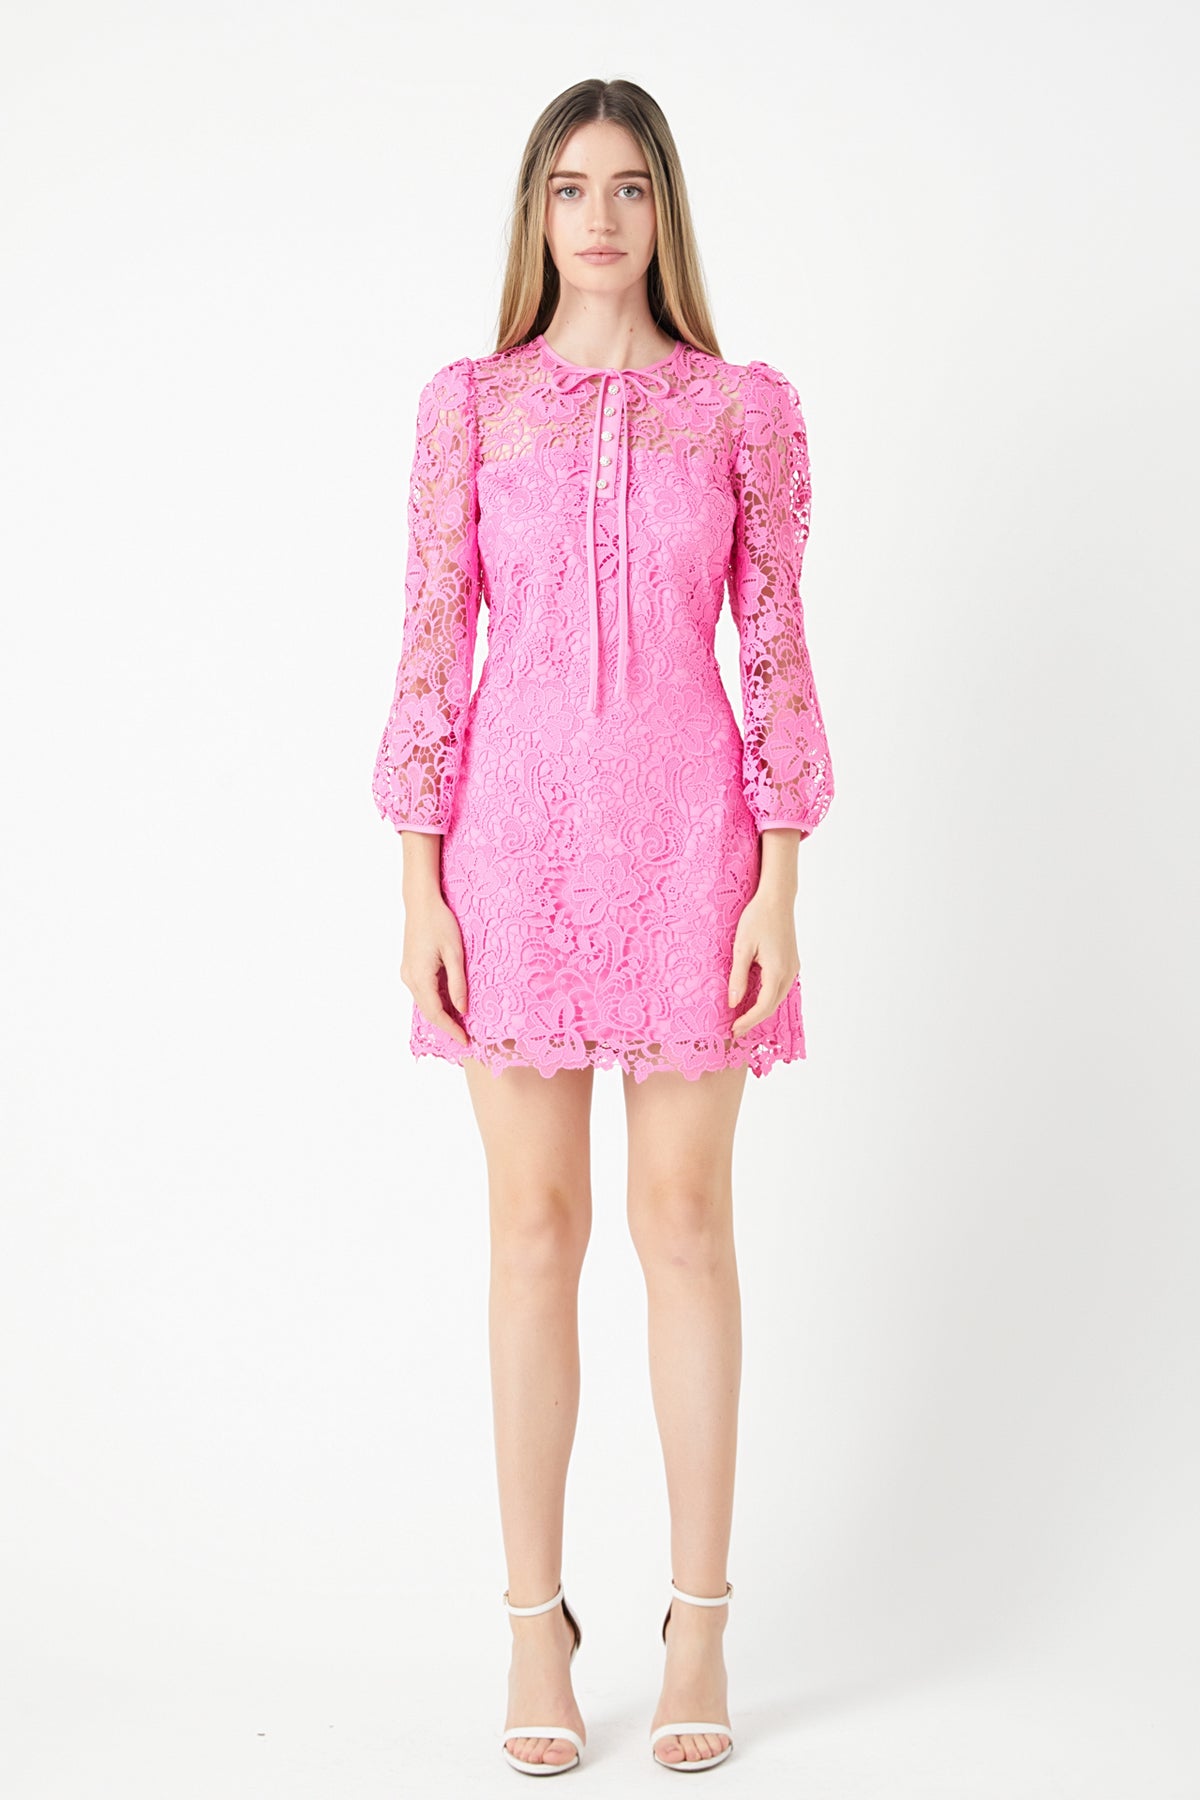 ENDLESS ROSE - Lace Mini Dress - DRESSES available at Objectrare